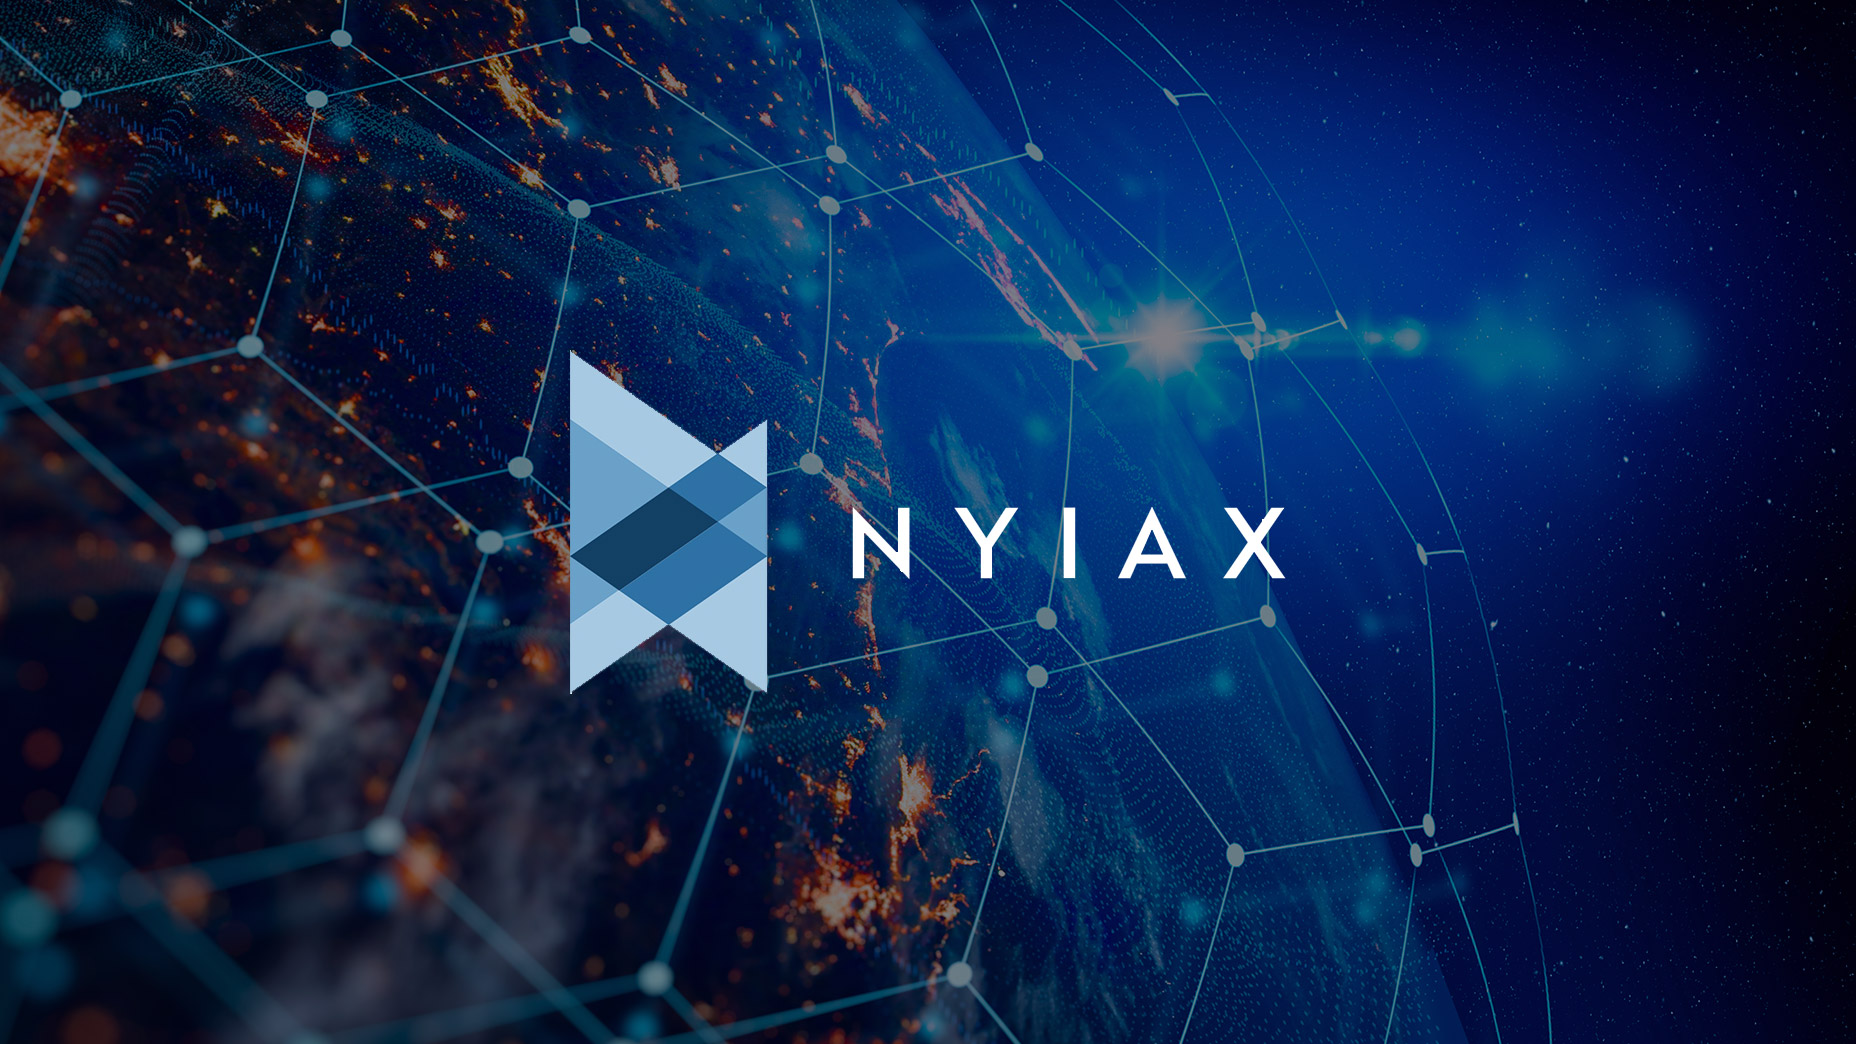 IPO of NYIAX: New Level of Trading Ads